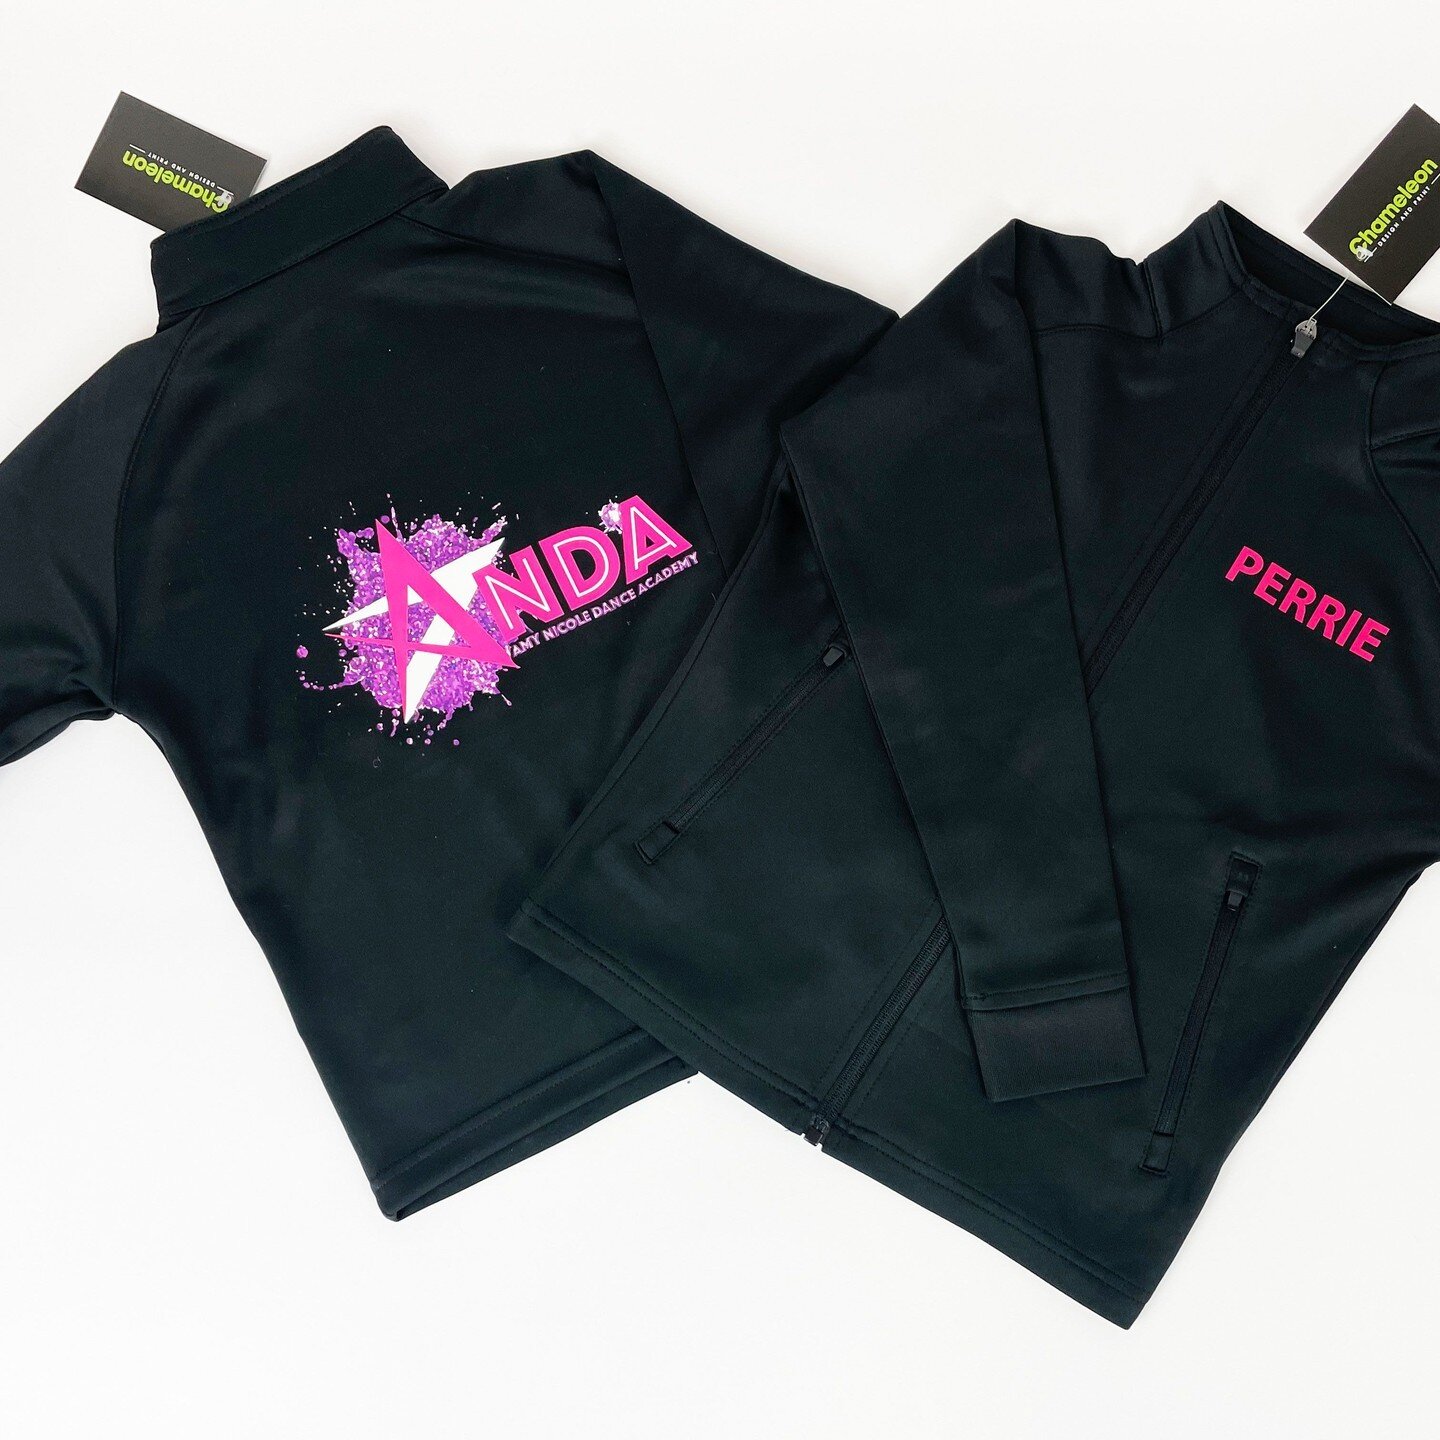 A vibrant printed uniform for the Amy Nicole Dance Academy today @andanceacademy - A bold colourful logo on all of their garments, bags and dance gear! Professionally printed by Chameleon as part of our Dance Uniform service. 

Find out more through 